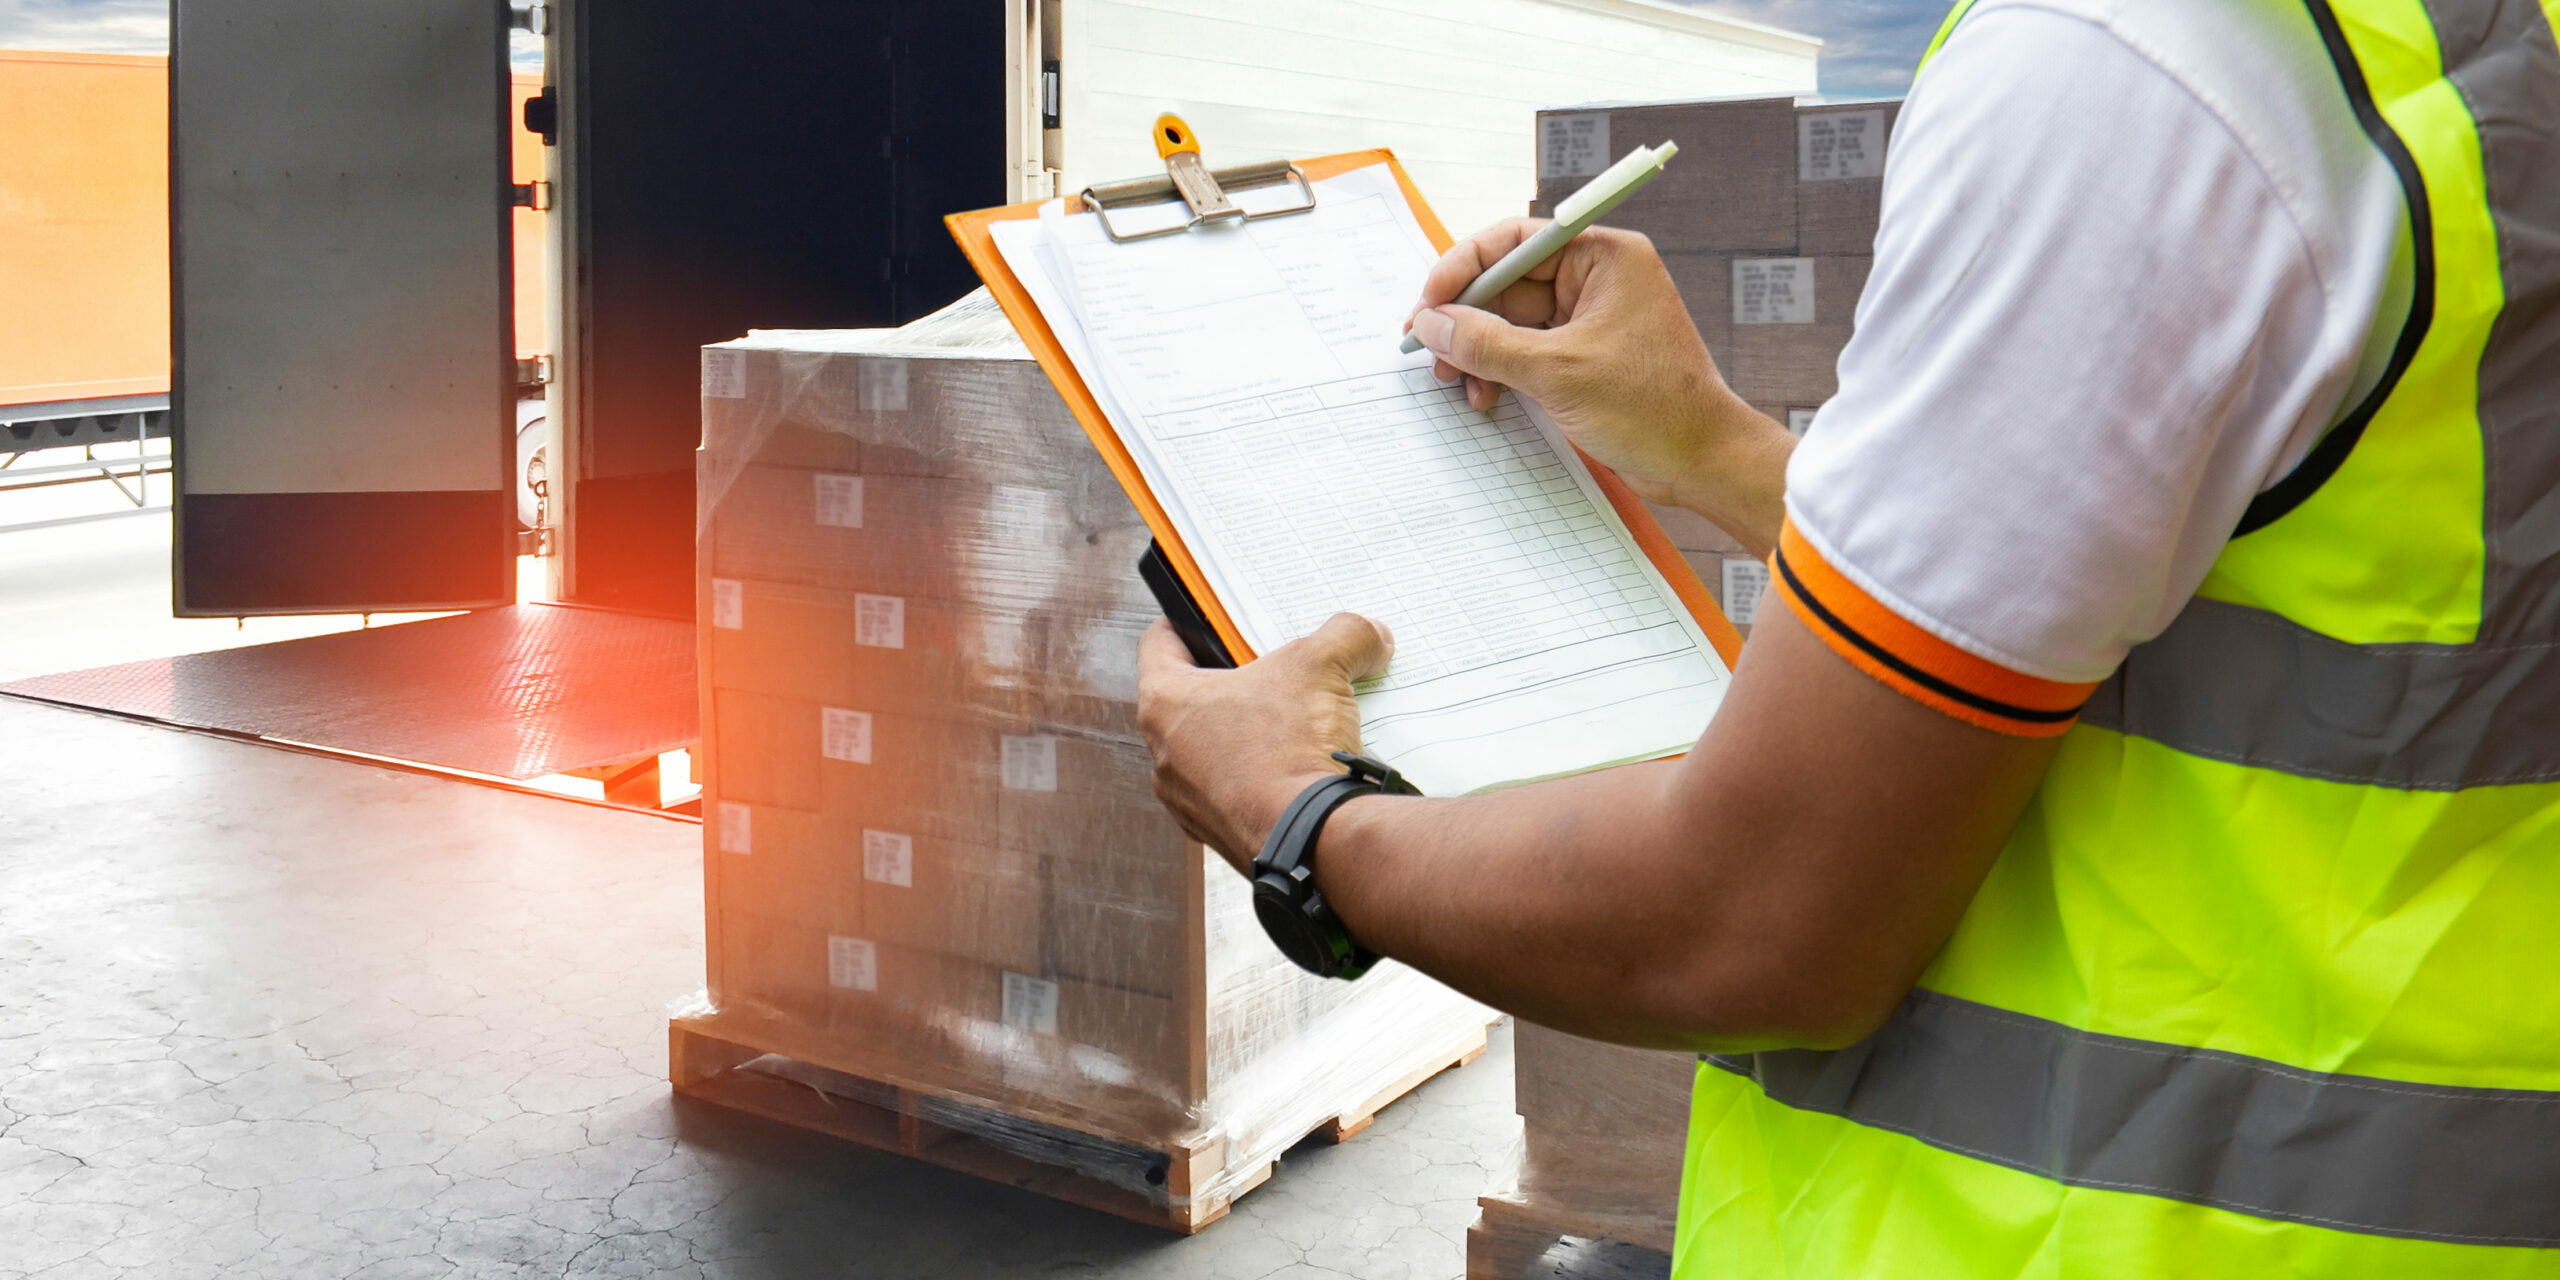 Worker,Courier,Holding,Clipboard,Control,Loading,Package,Box,Into,Cargo